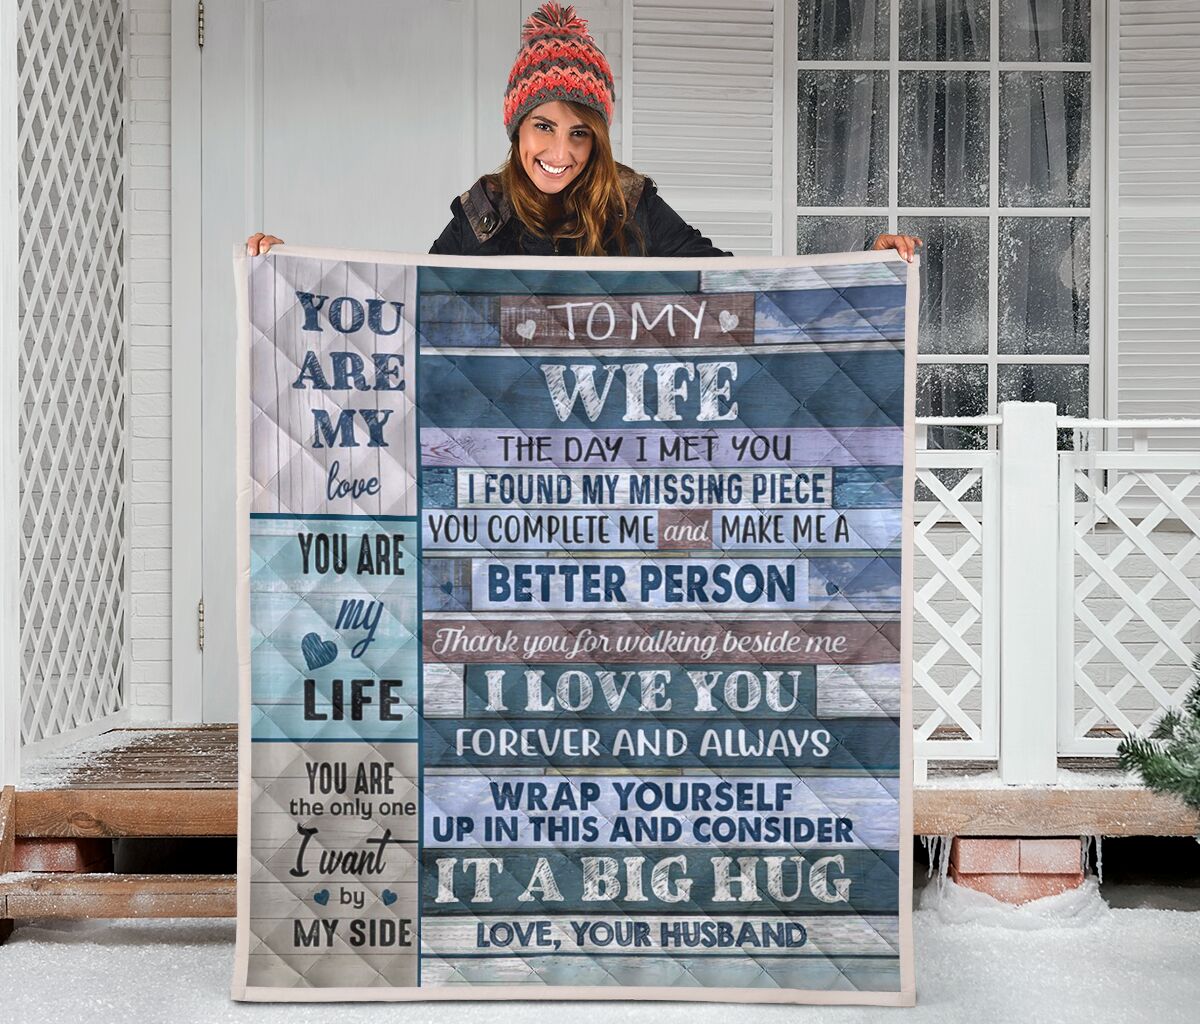 To my wife the day I met you blanket